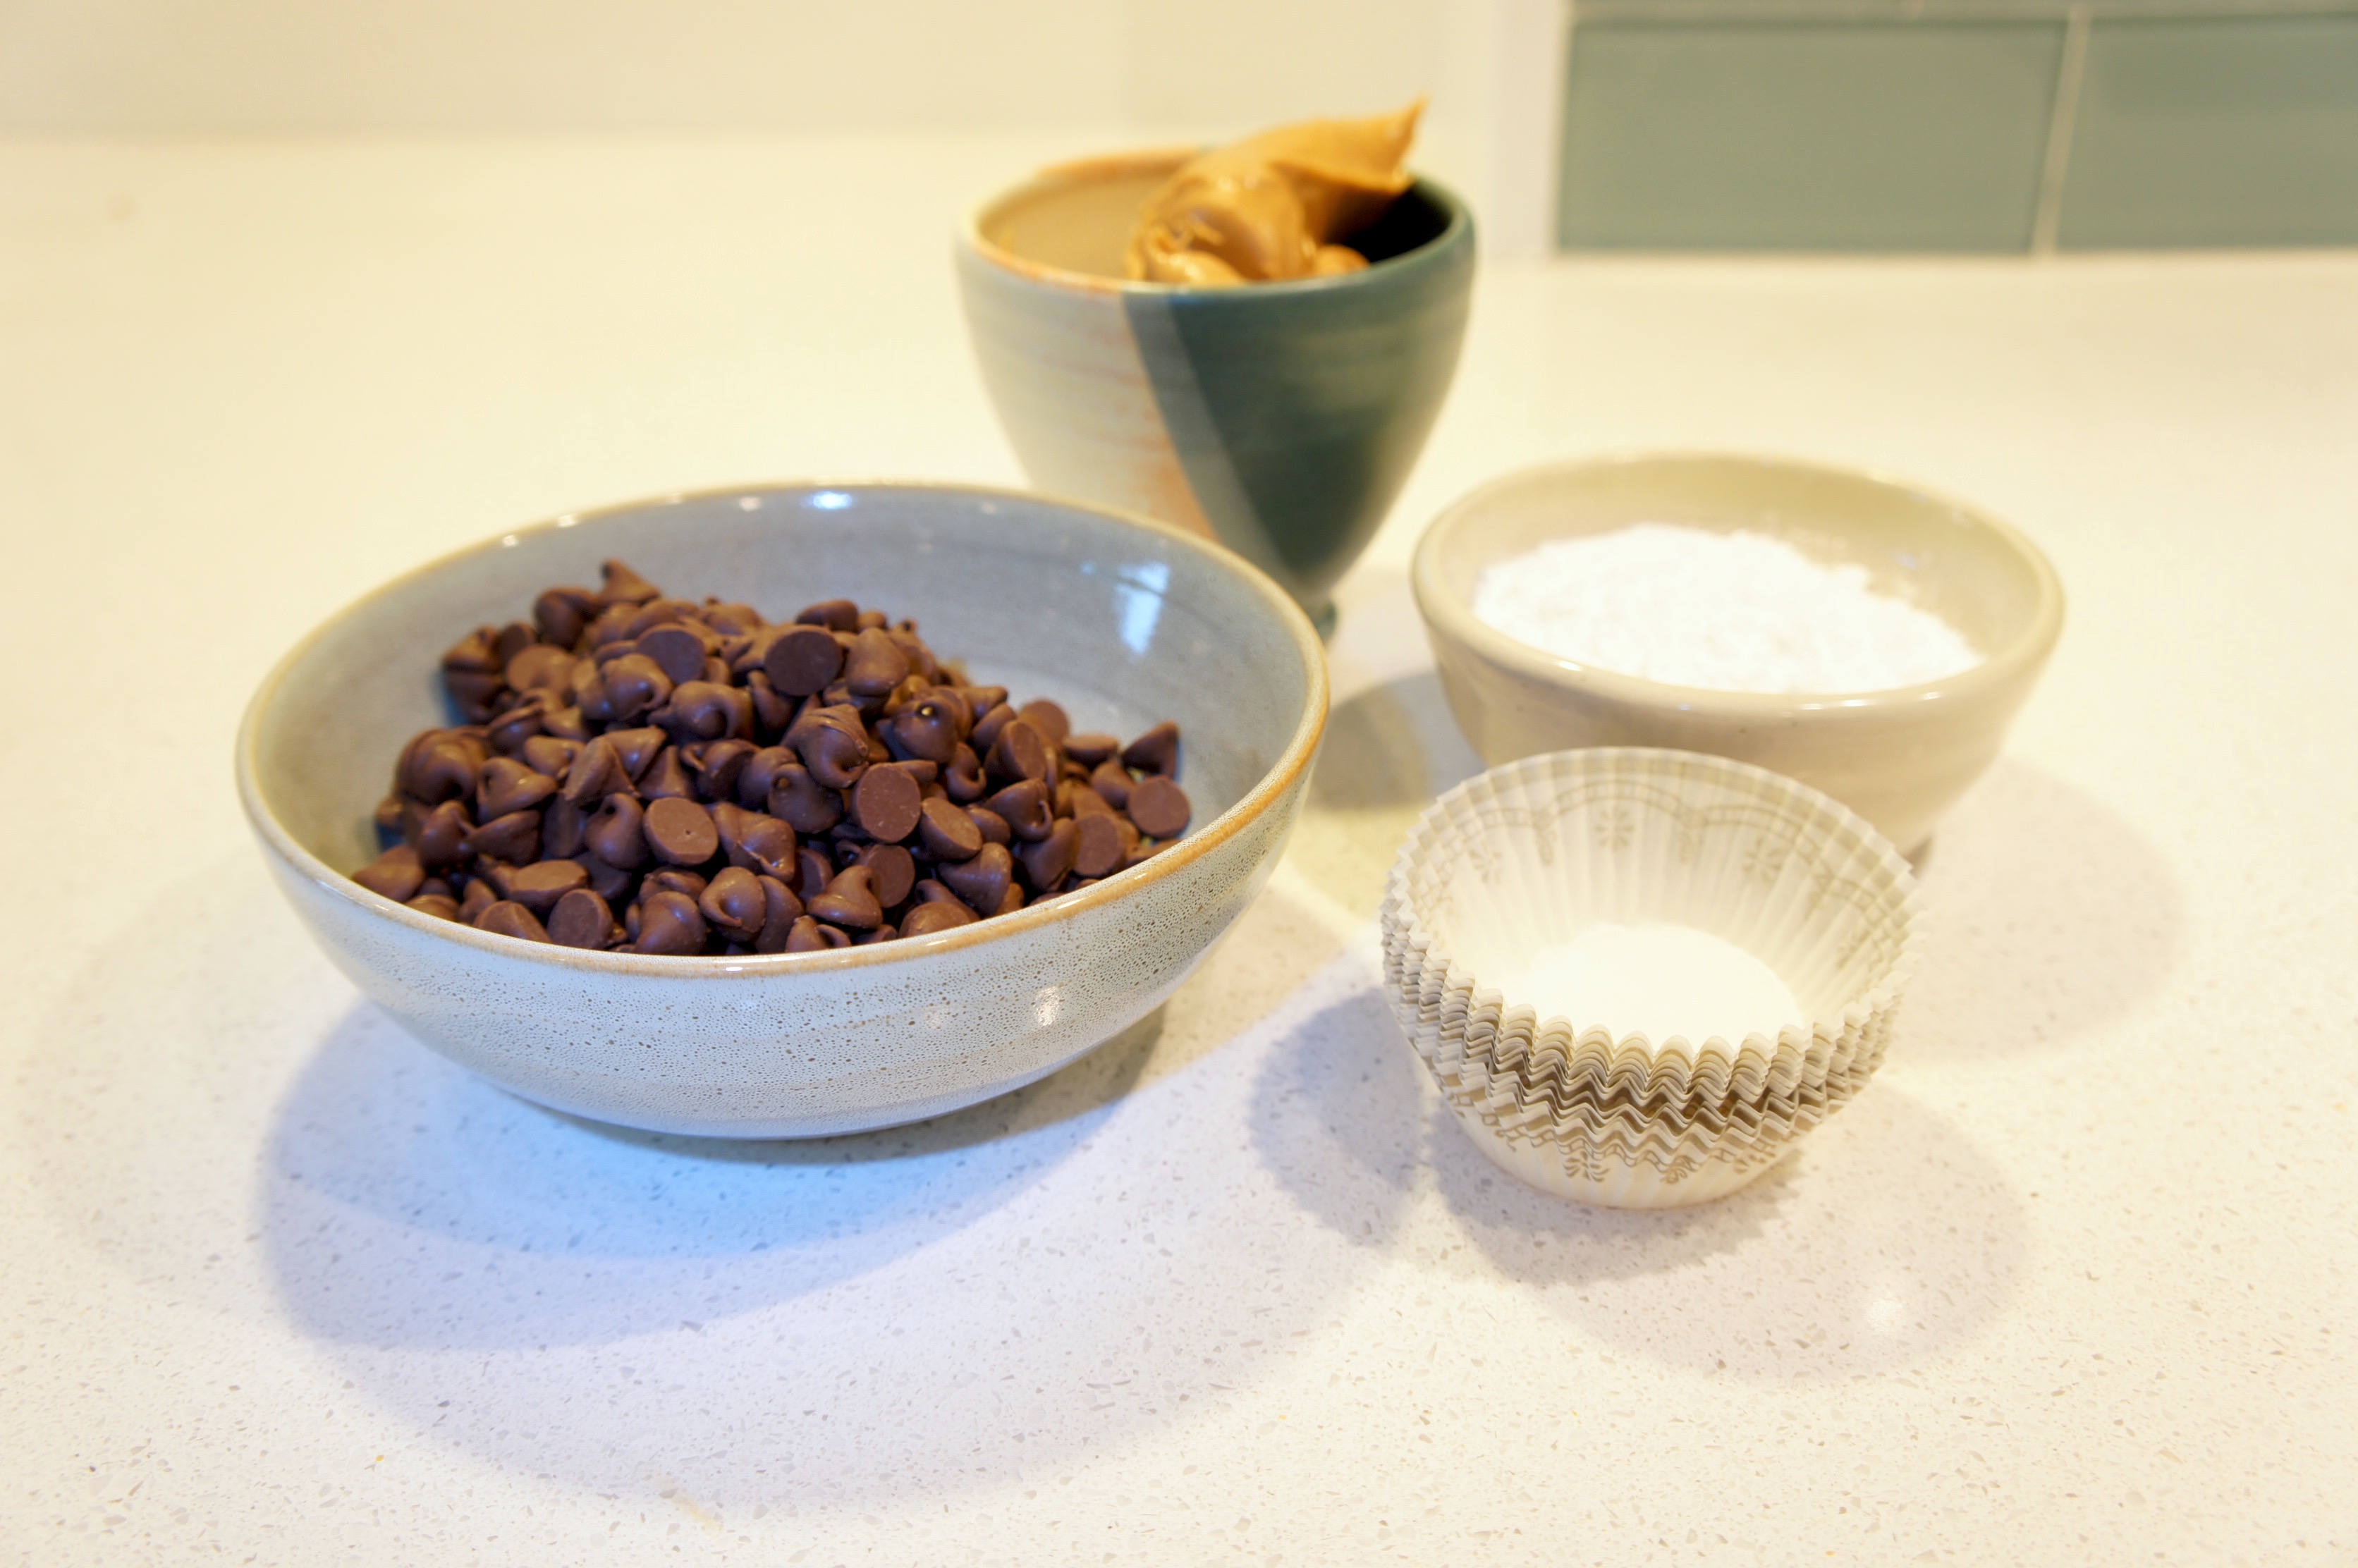 Peanut butter cup ingredients